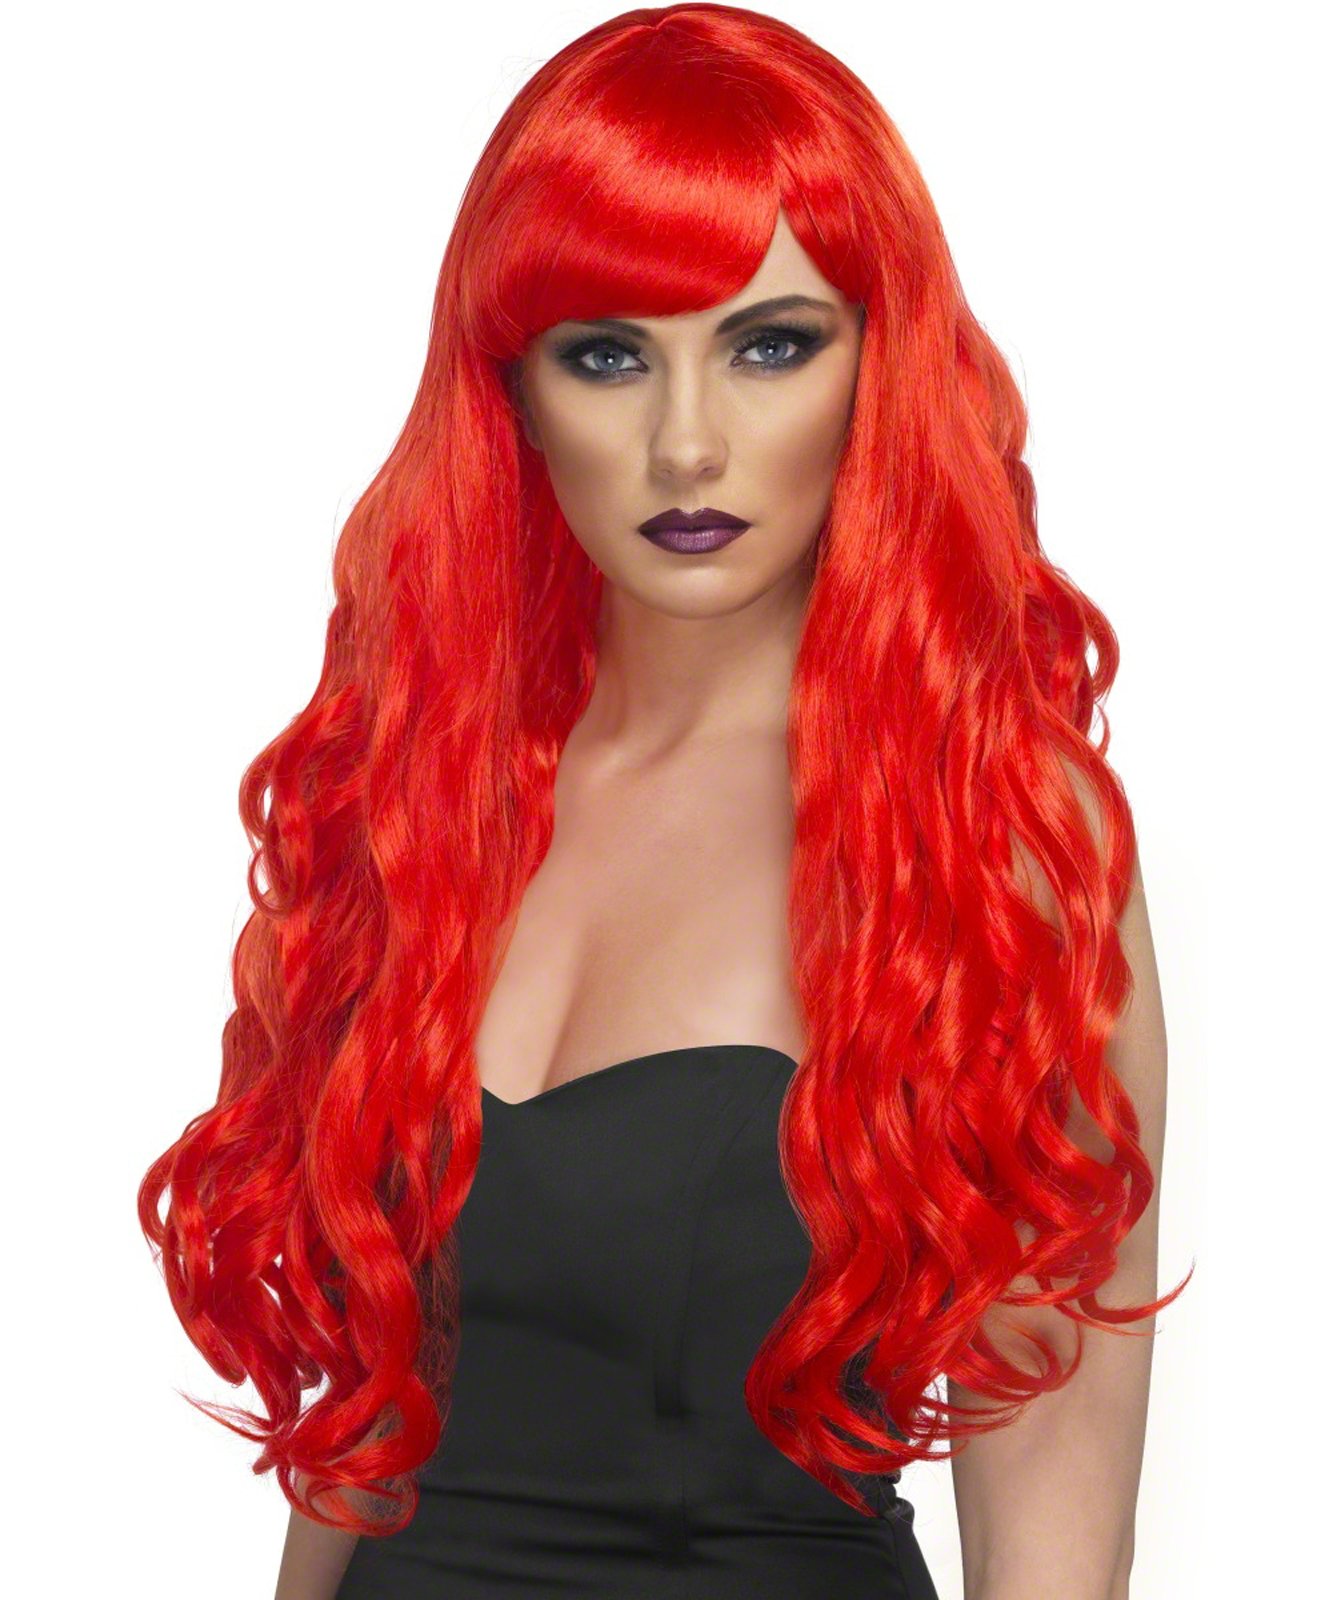 Desire (Red) Adult Wig